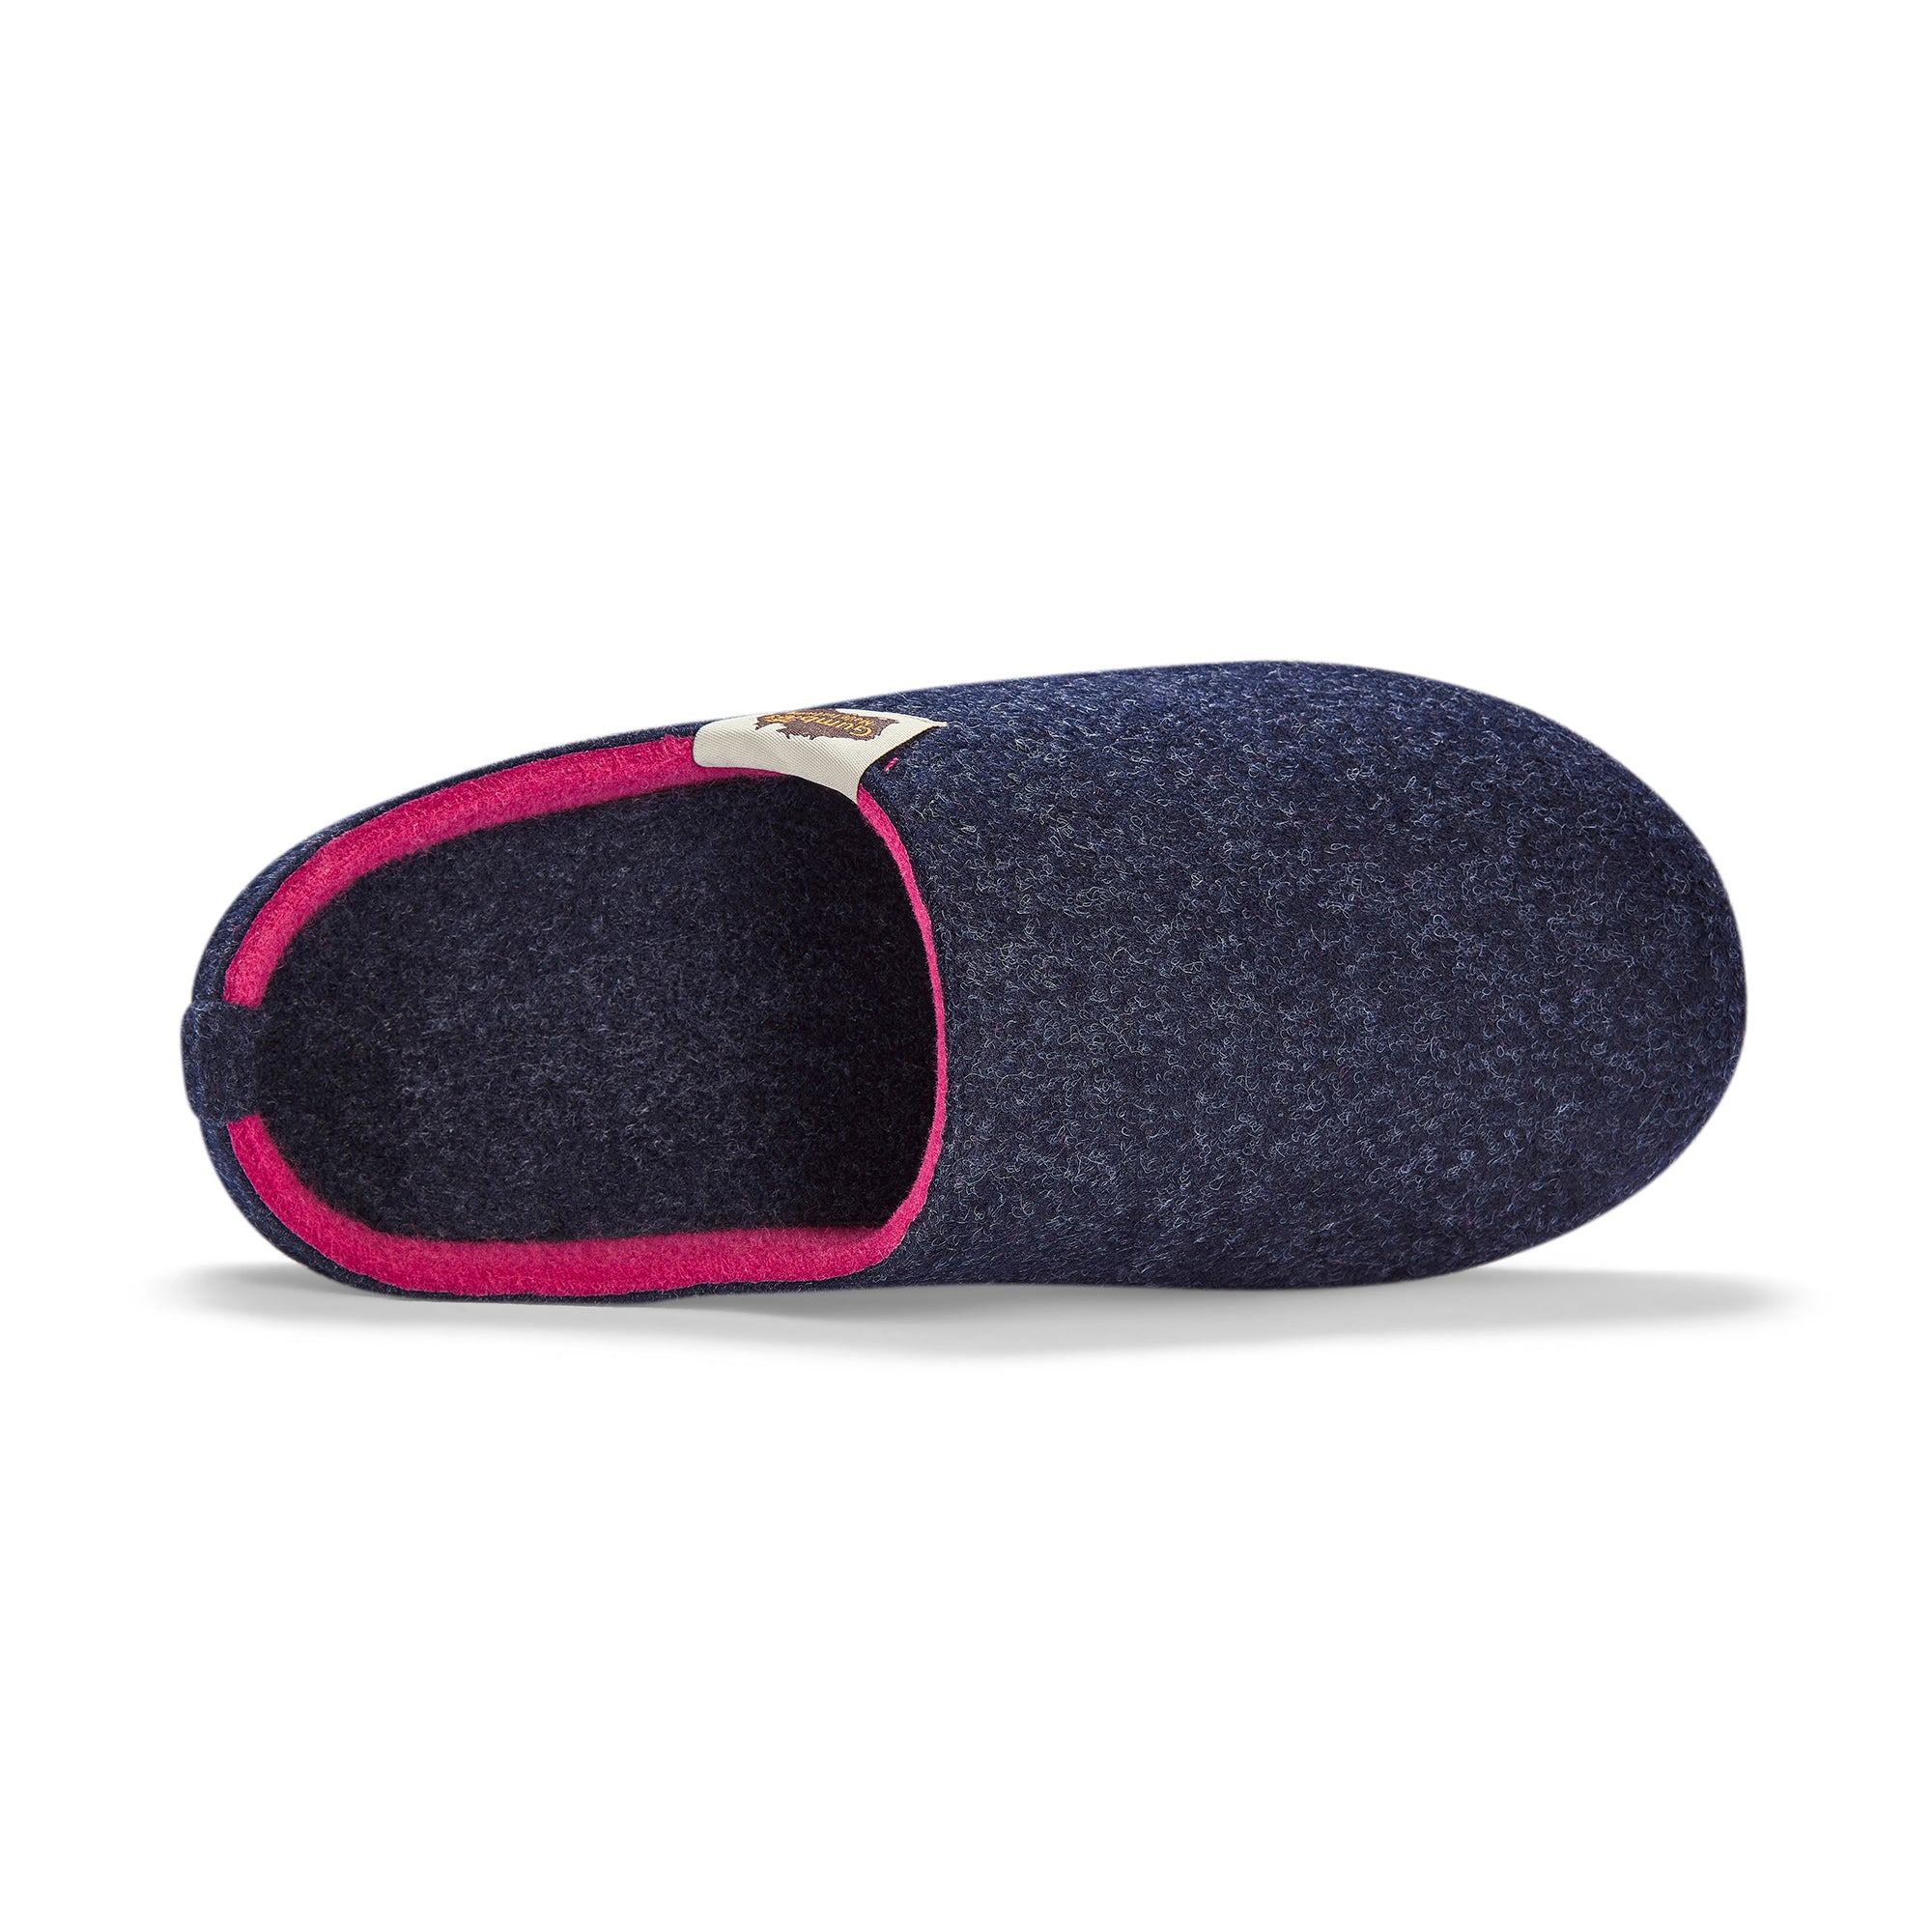 Outback Slippers - Women's - Navy & Pink